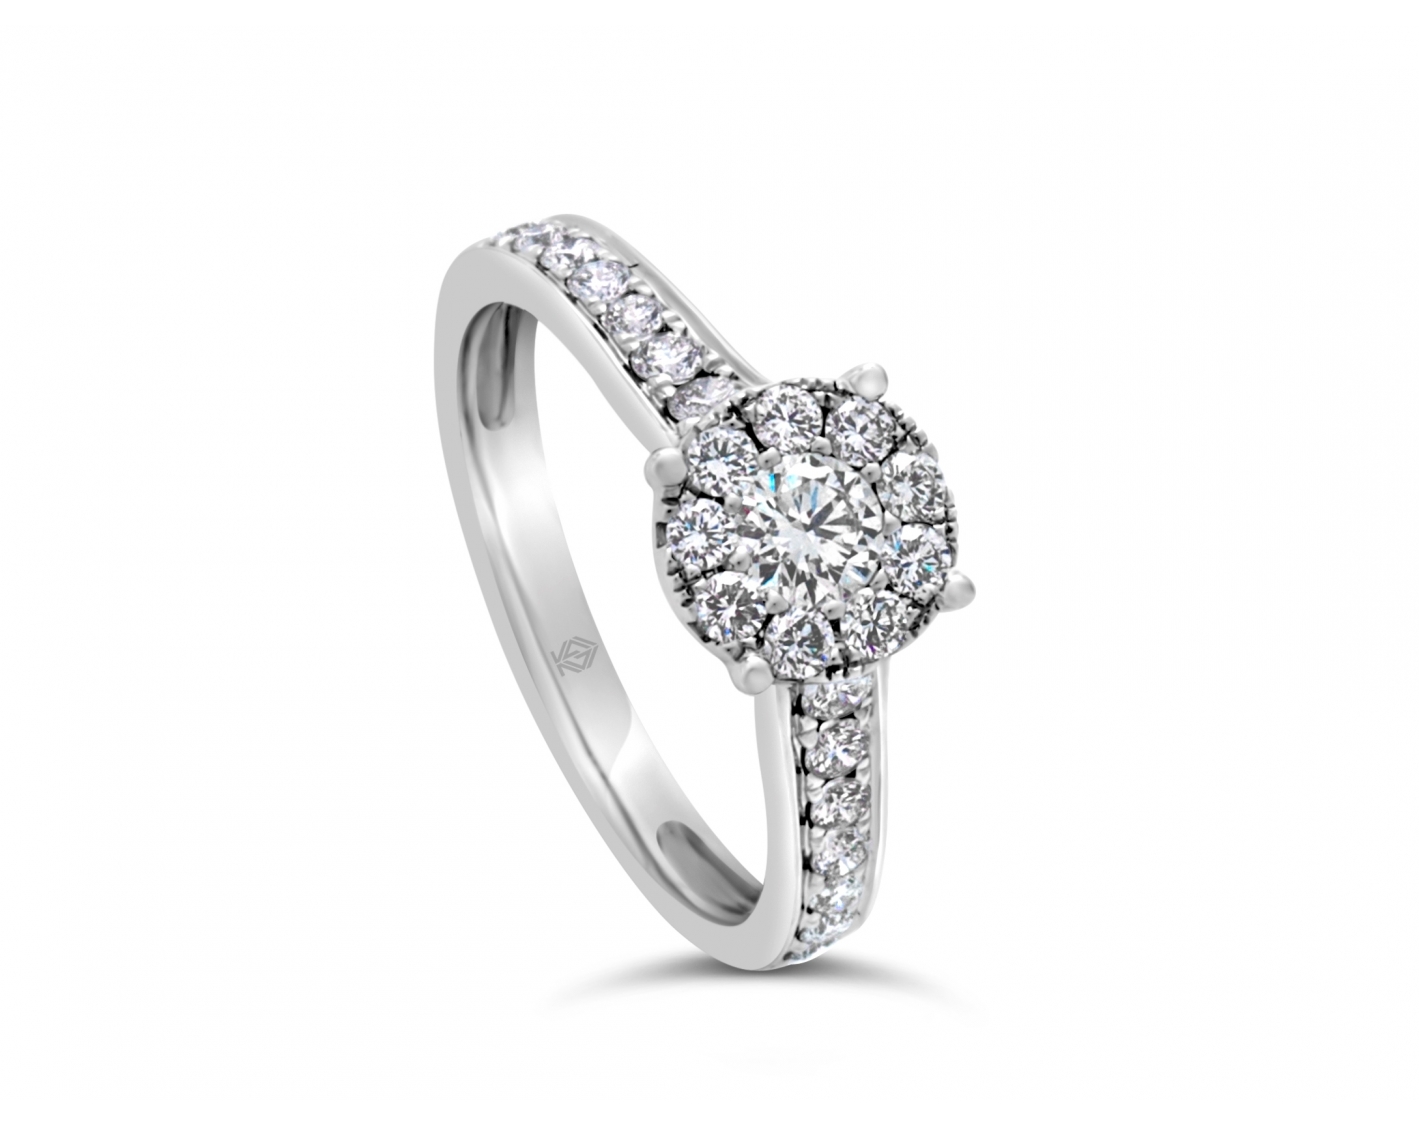 18K WHITE GOLD HALO ILLUSION SET ENGAGEMENT RING WITH ROUND CHANNEL SET DIAMONDS